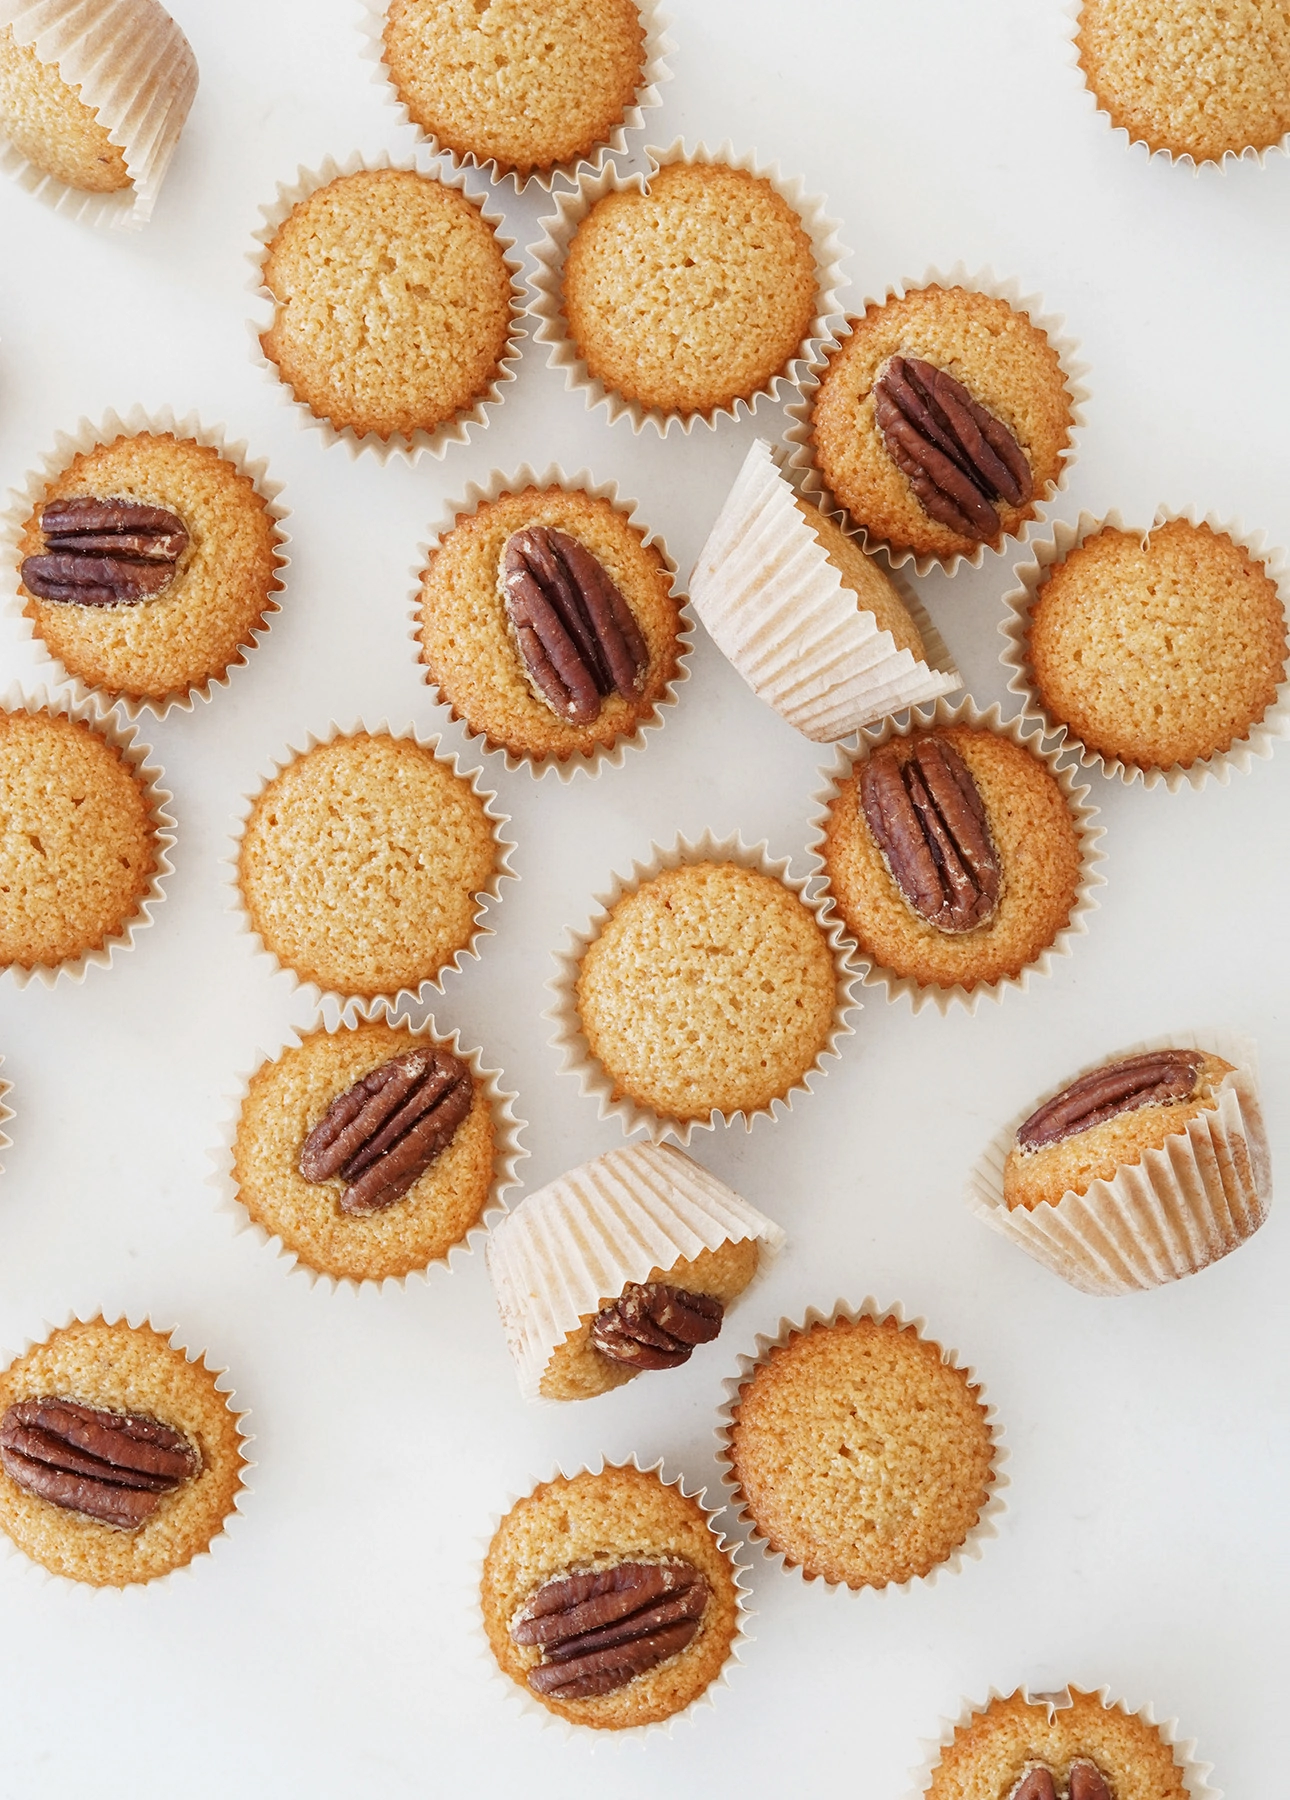 Maple financiers, an easy-to-make French-inspired dessert // FoodNouveau.com